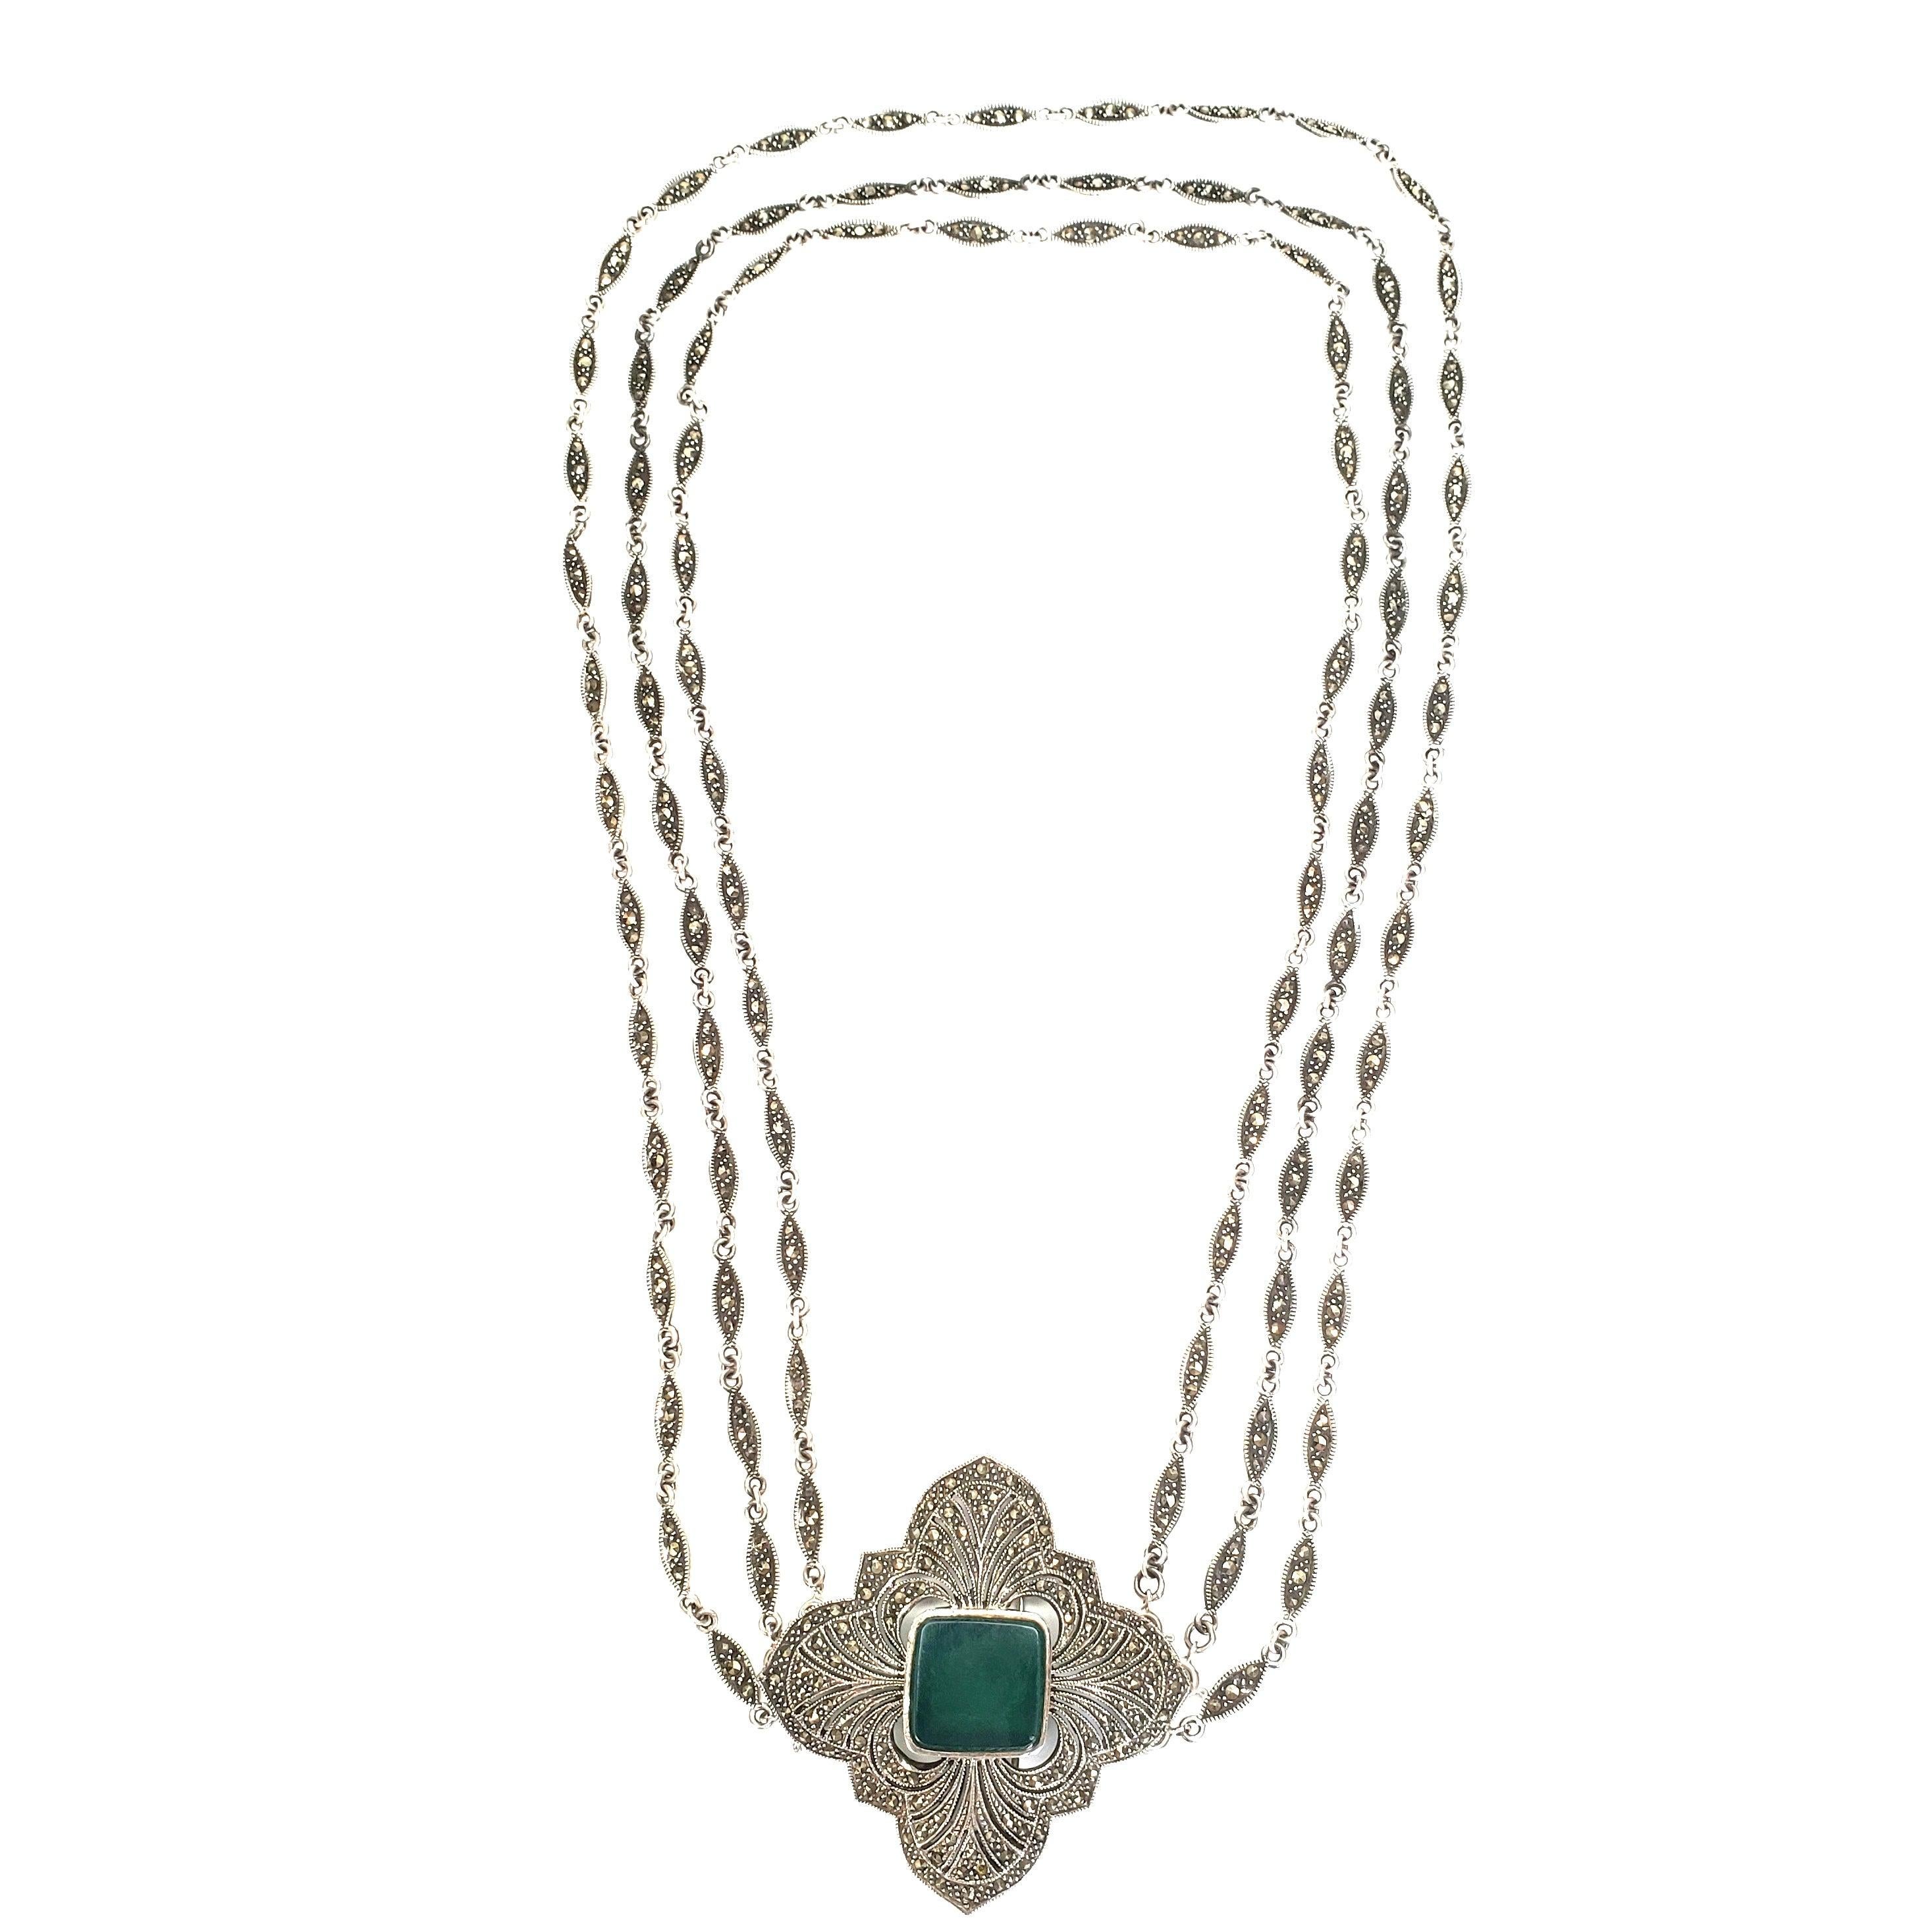 Vintage sterling silver three strand necklace with chrysoprase and marcasite pendant / pin.

Large and ornate marcasite encrusted pendant, that can also be worn as a pin, features a large square chrysoprase stone. Three detachable marcasite